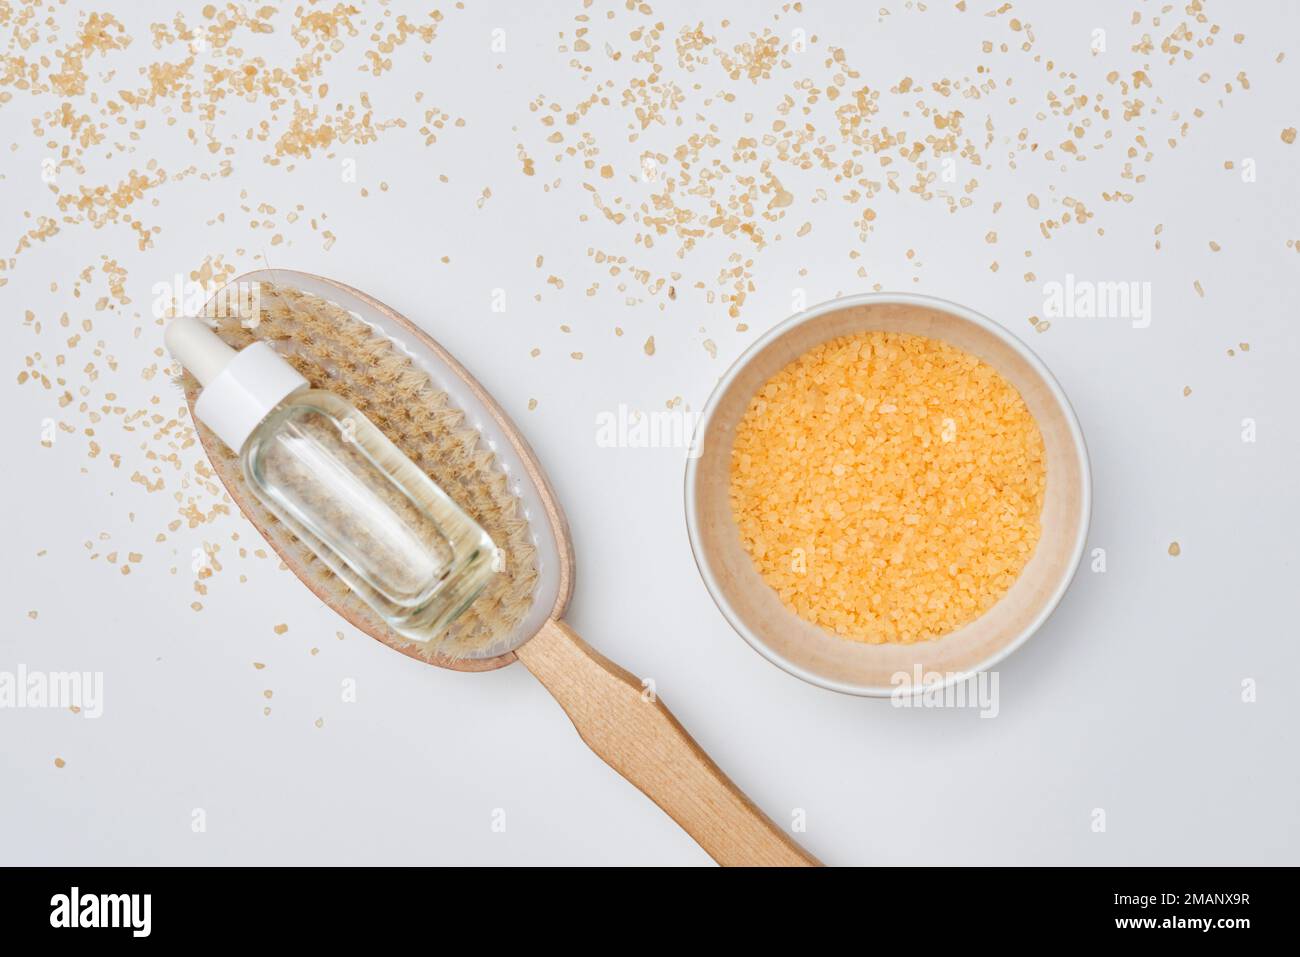 a wooden spoon with some sugar on it next to a small bowl filled with oats and gold flakes Stock Photo